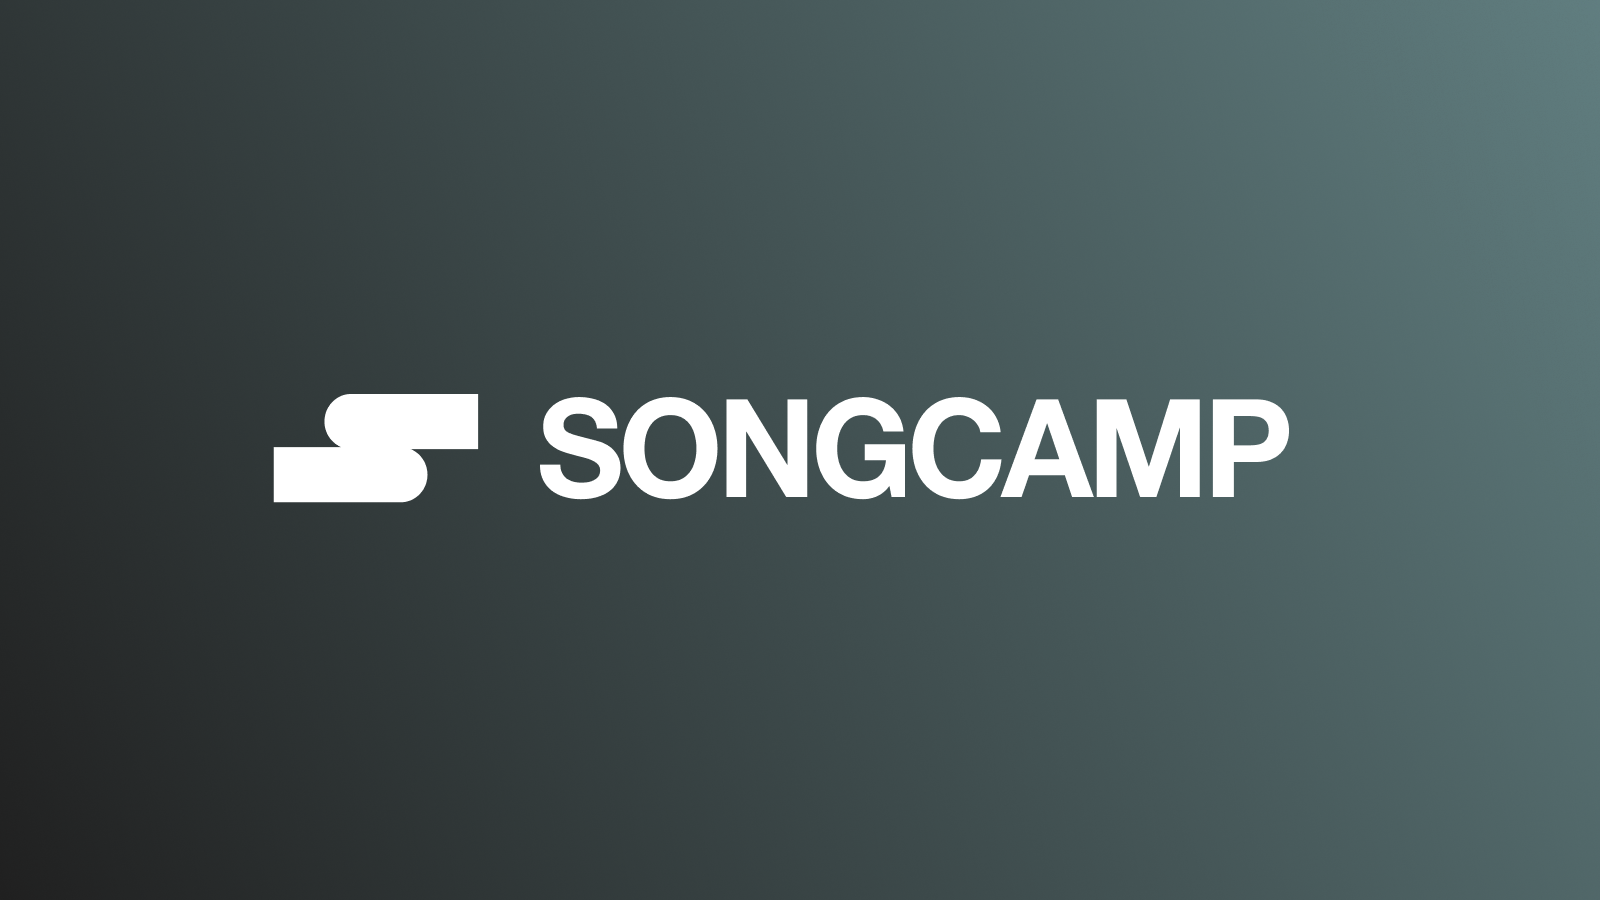 Feature image for https://splits.ghost.io/content/images/2023/06/songcamp-1.png